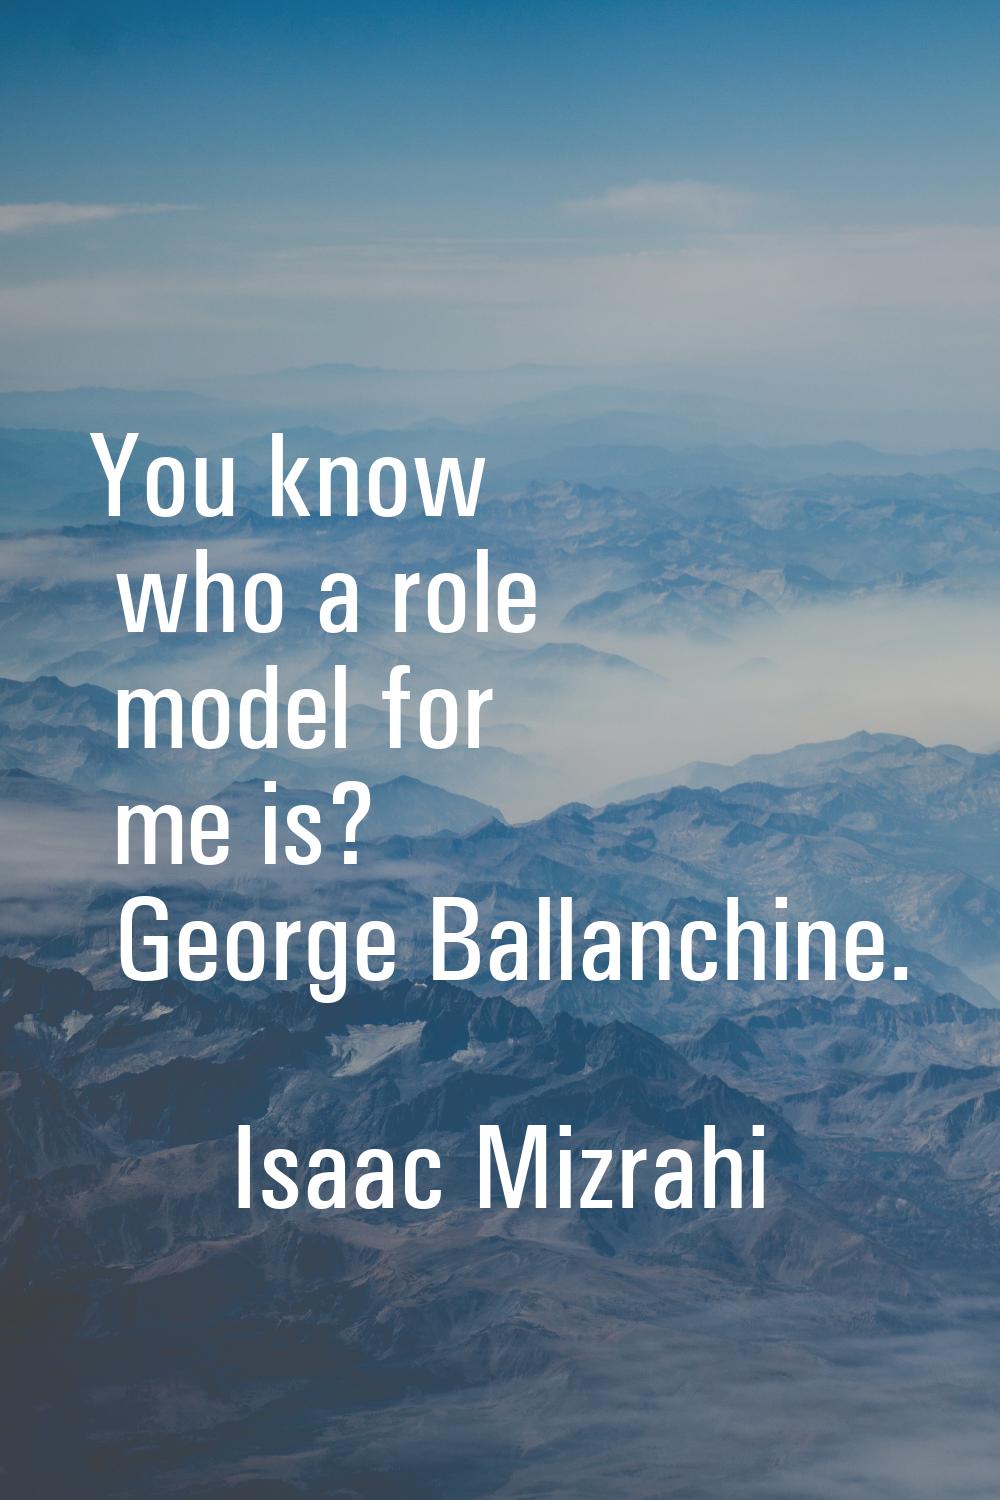 You know who a role model for me is? George Ballanchine.